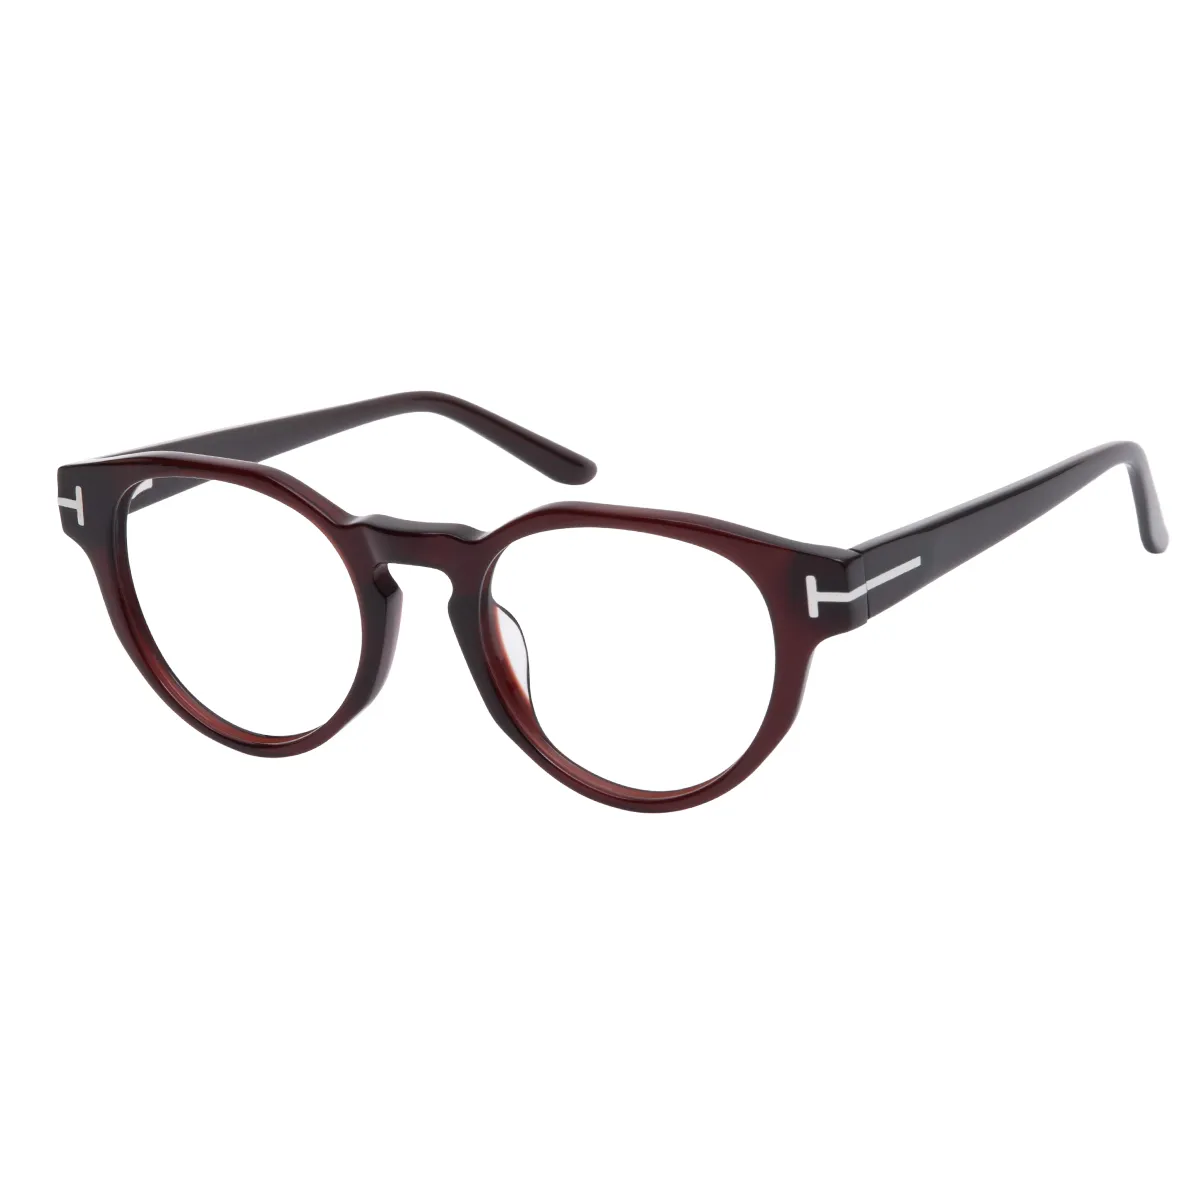 Reina - Round Brown Glasses for Women